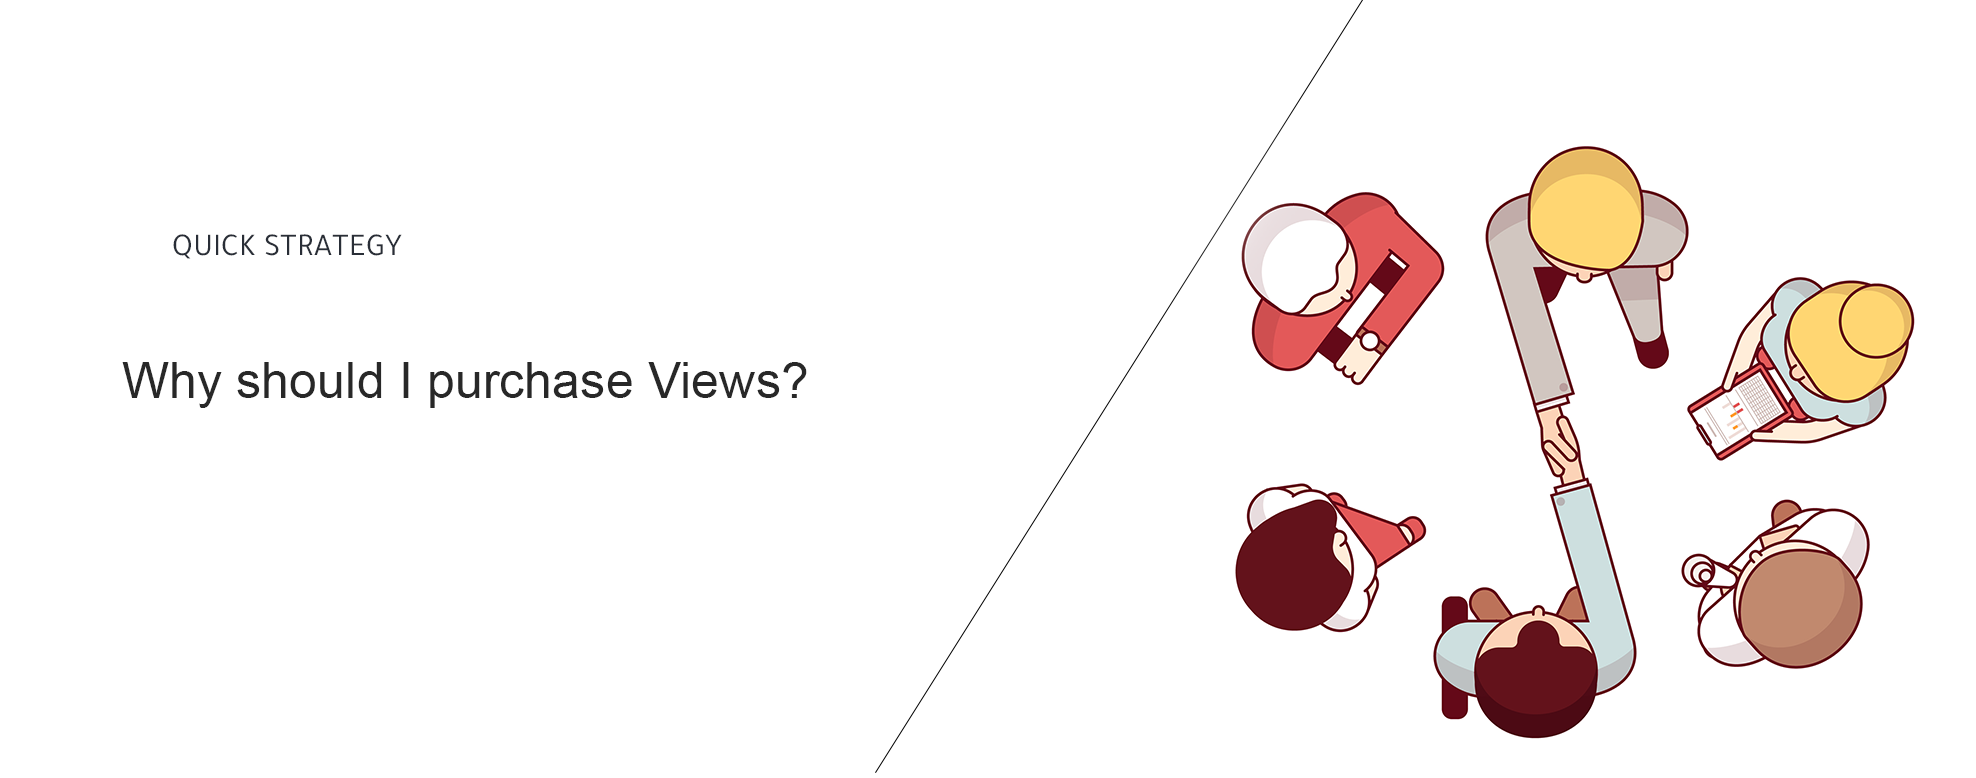 Why should I purchase Views?